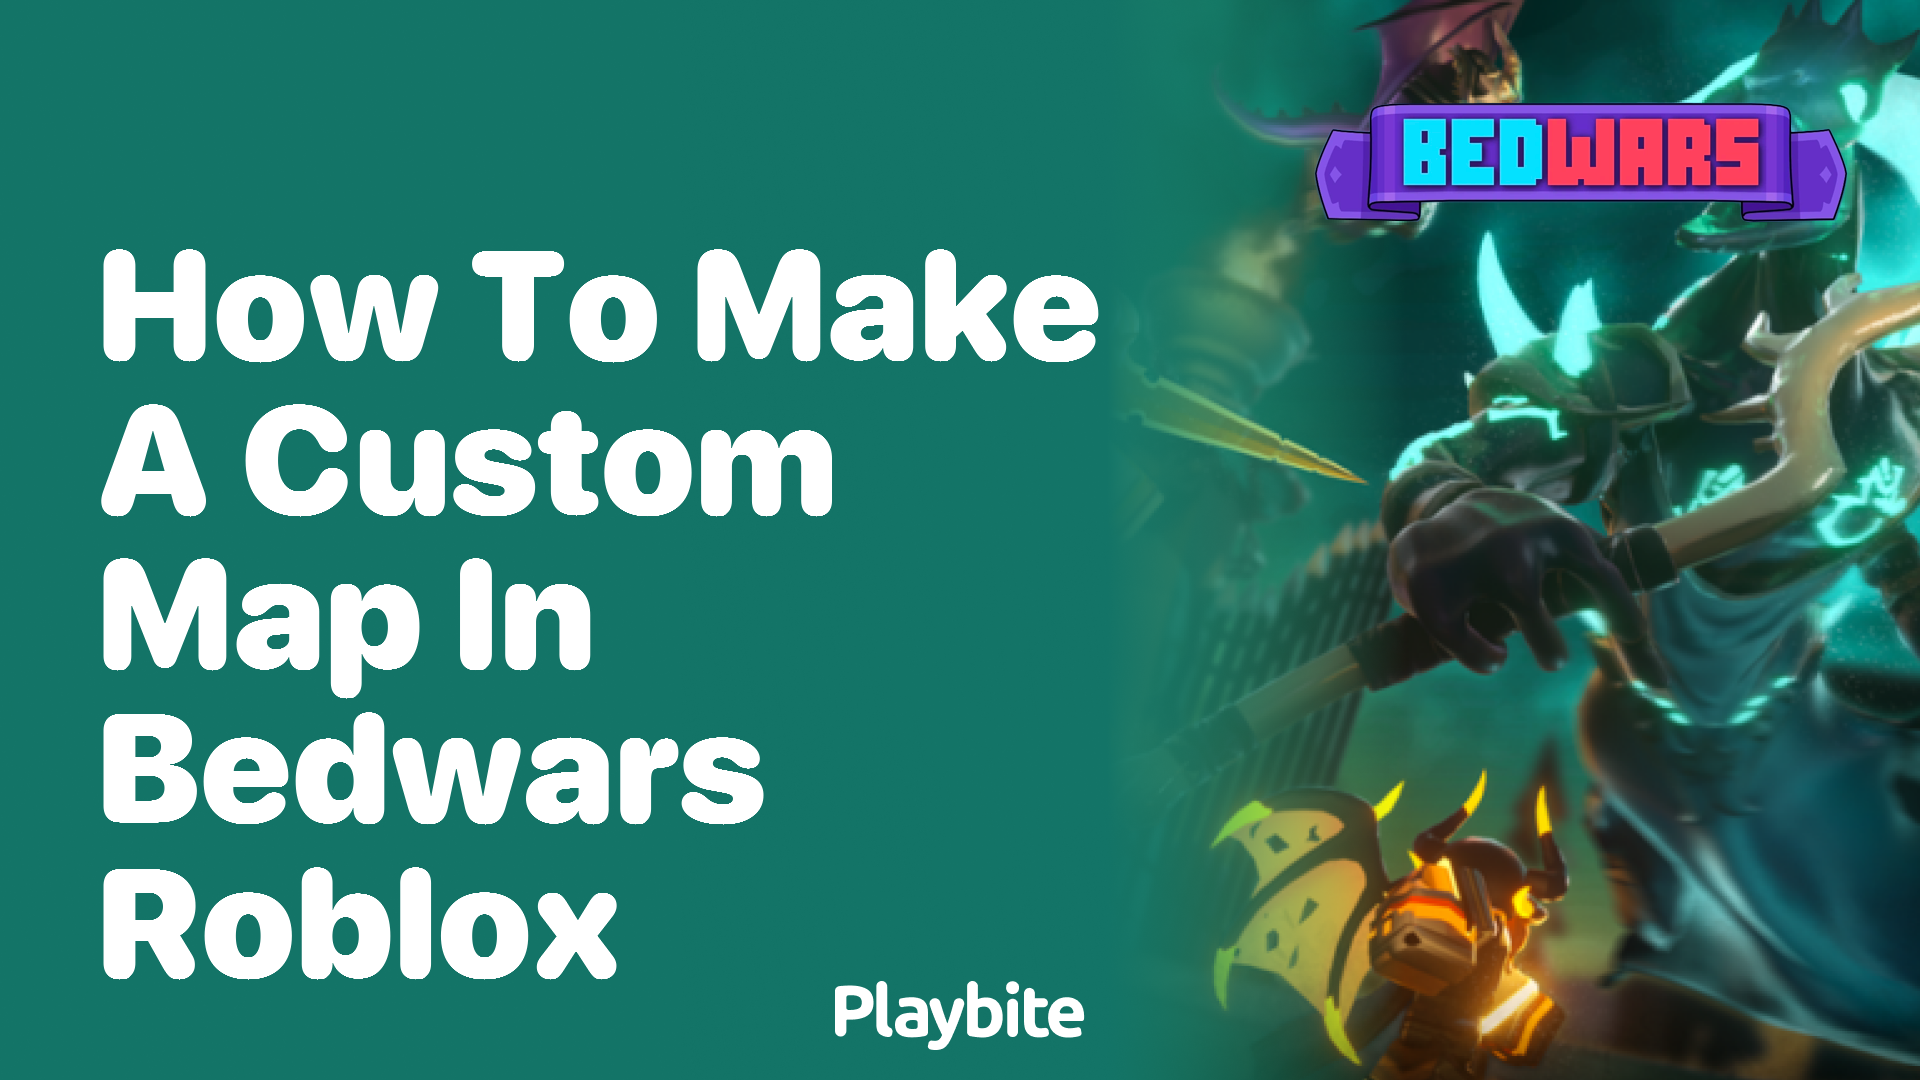 How to Make a Custom Map in Bedwars Roblox